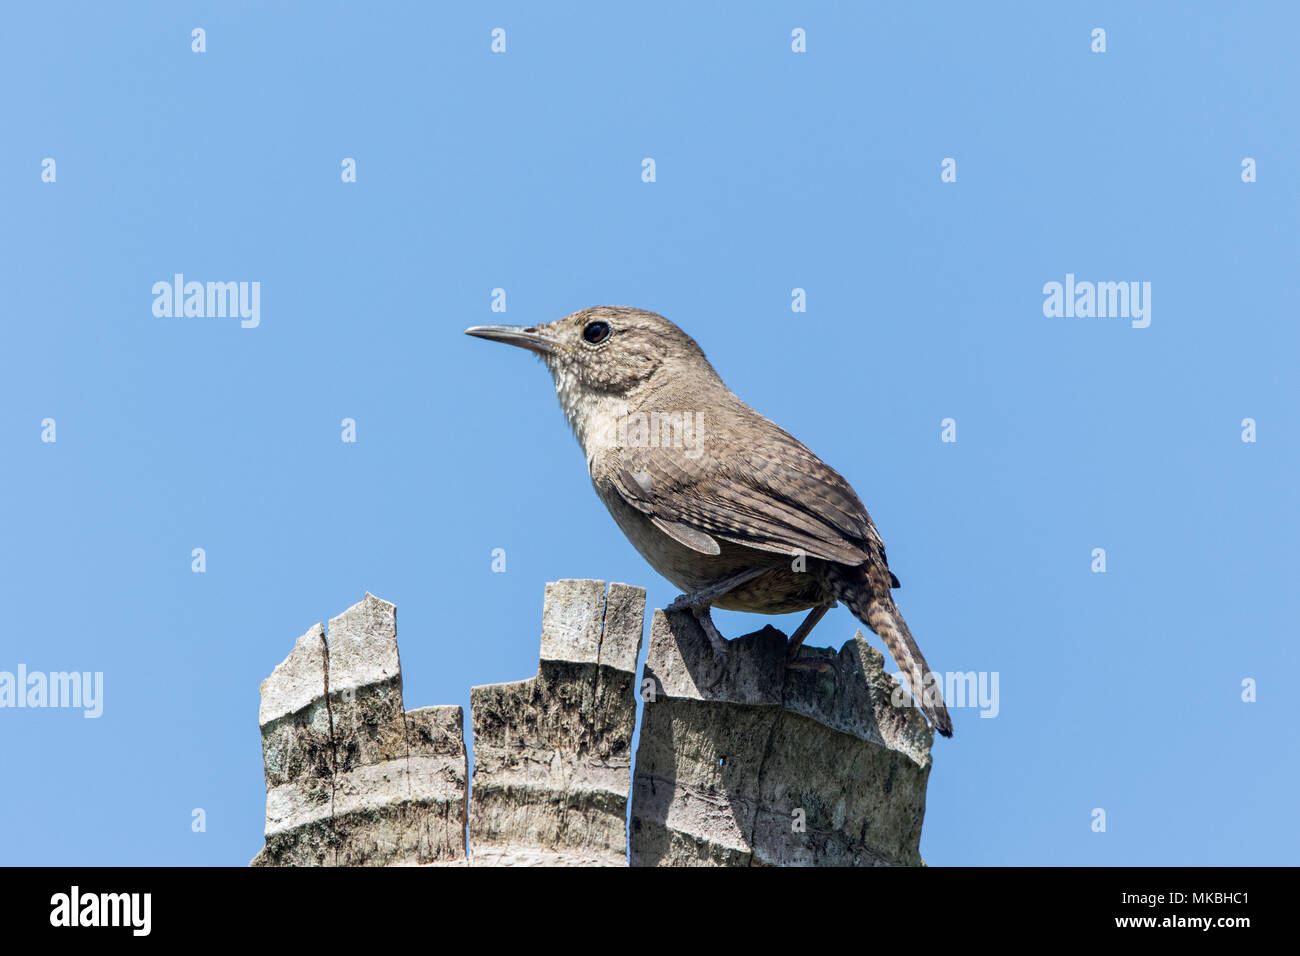 adult house wren Troglodytes aedon perched on dead palm tree, Costa Rica Stock Photo